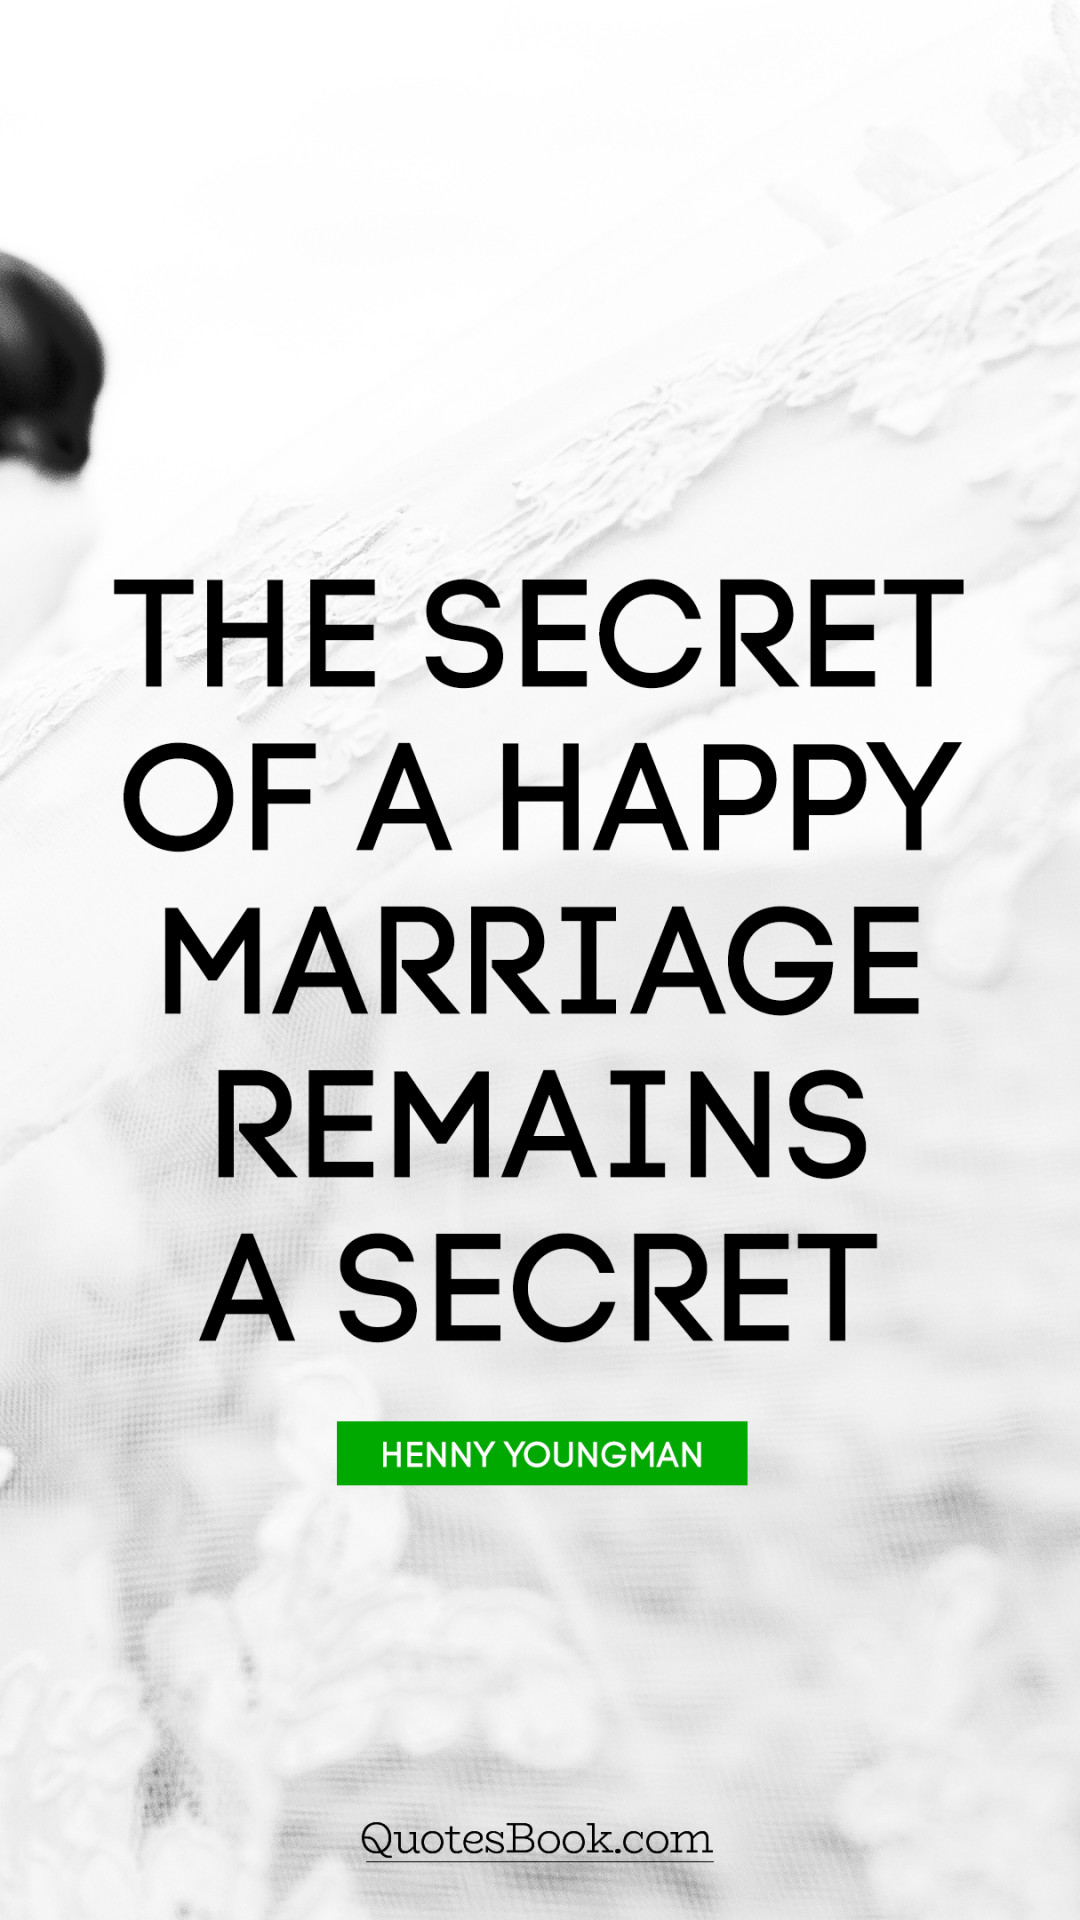 The secret of a happy marriage remains a secret. - Quote by Henny Youngman  - Page 2 - QuotesBook